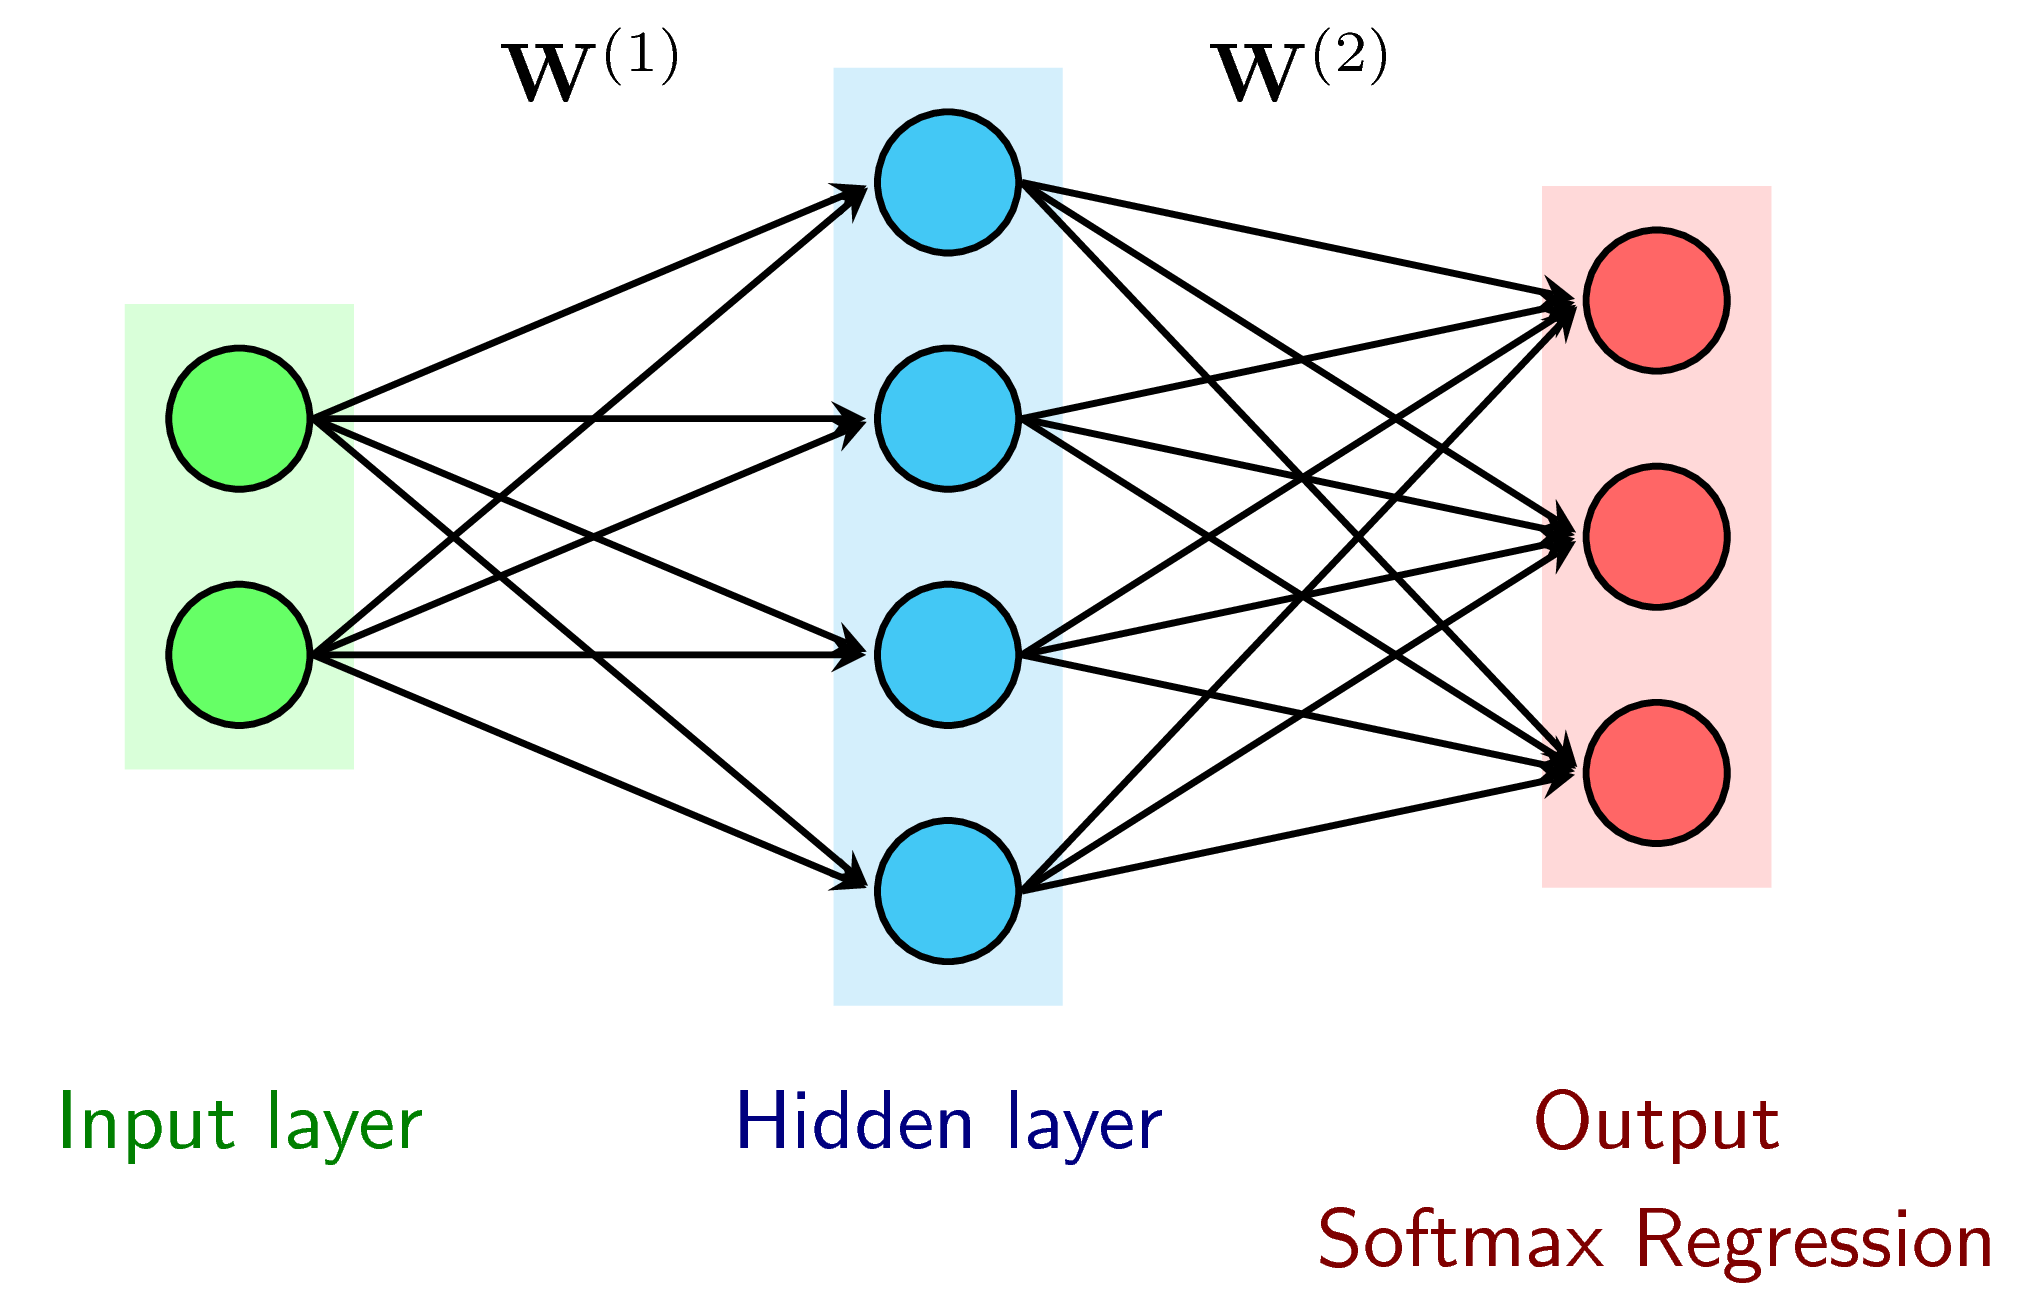 2-layer Neural Networks